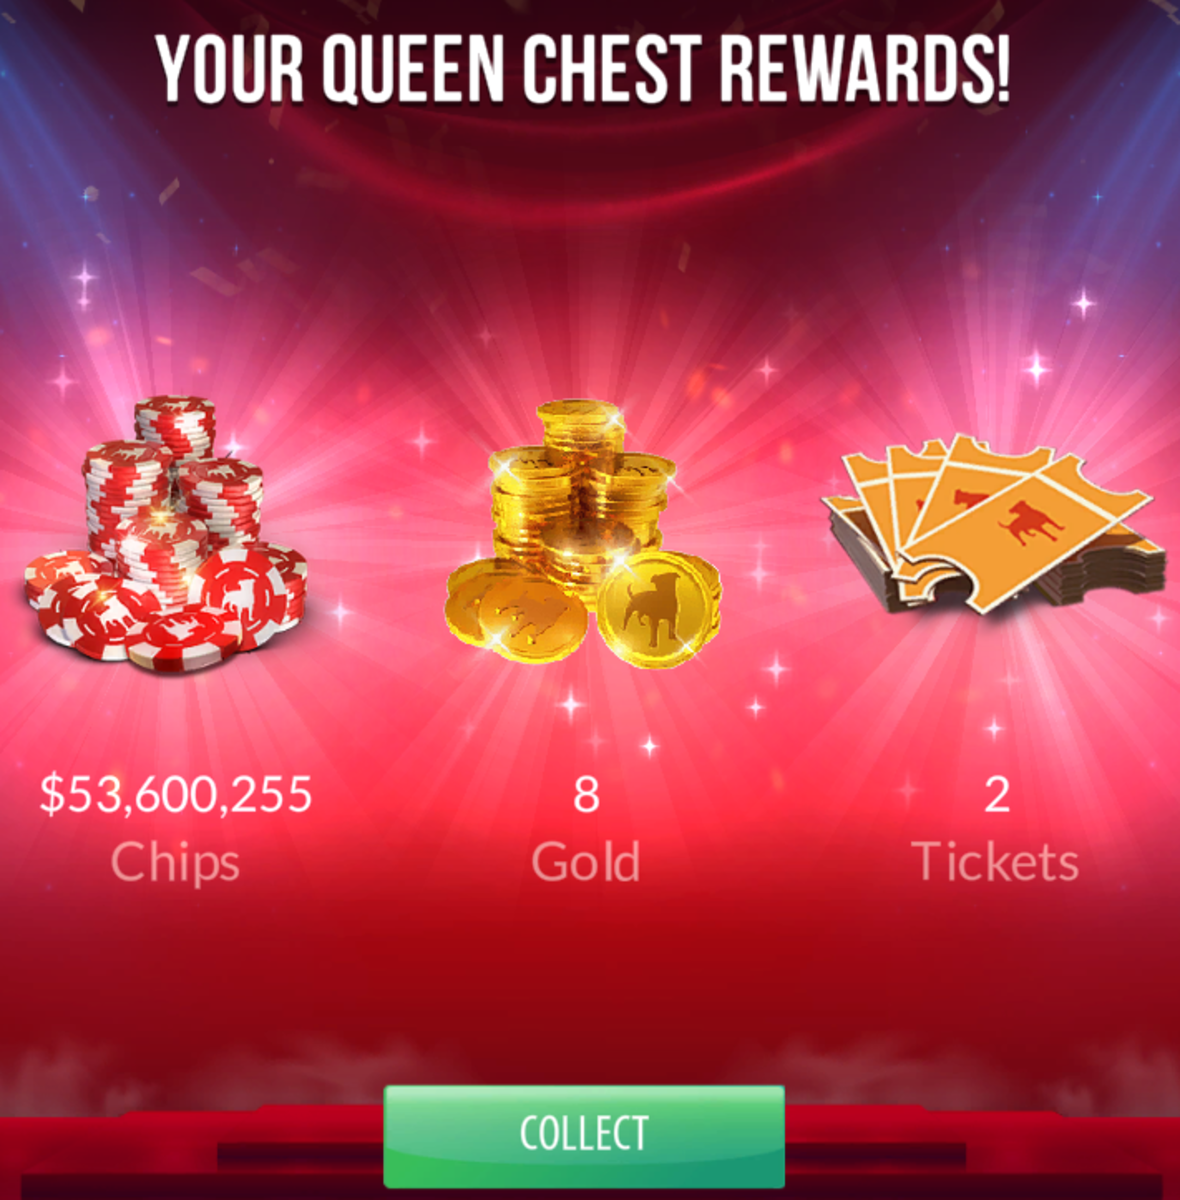 The reward I got from opening a chest after promoting in a league.